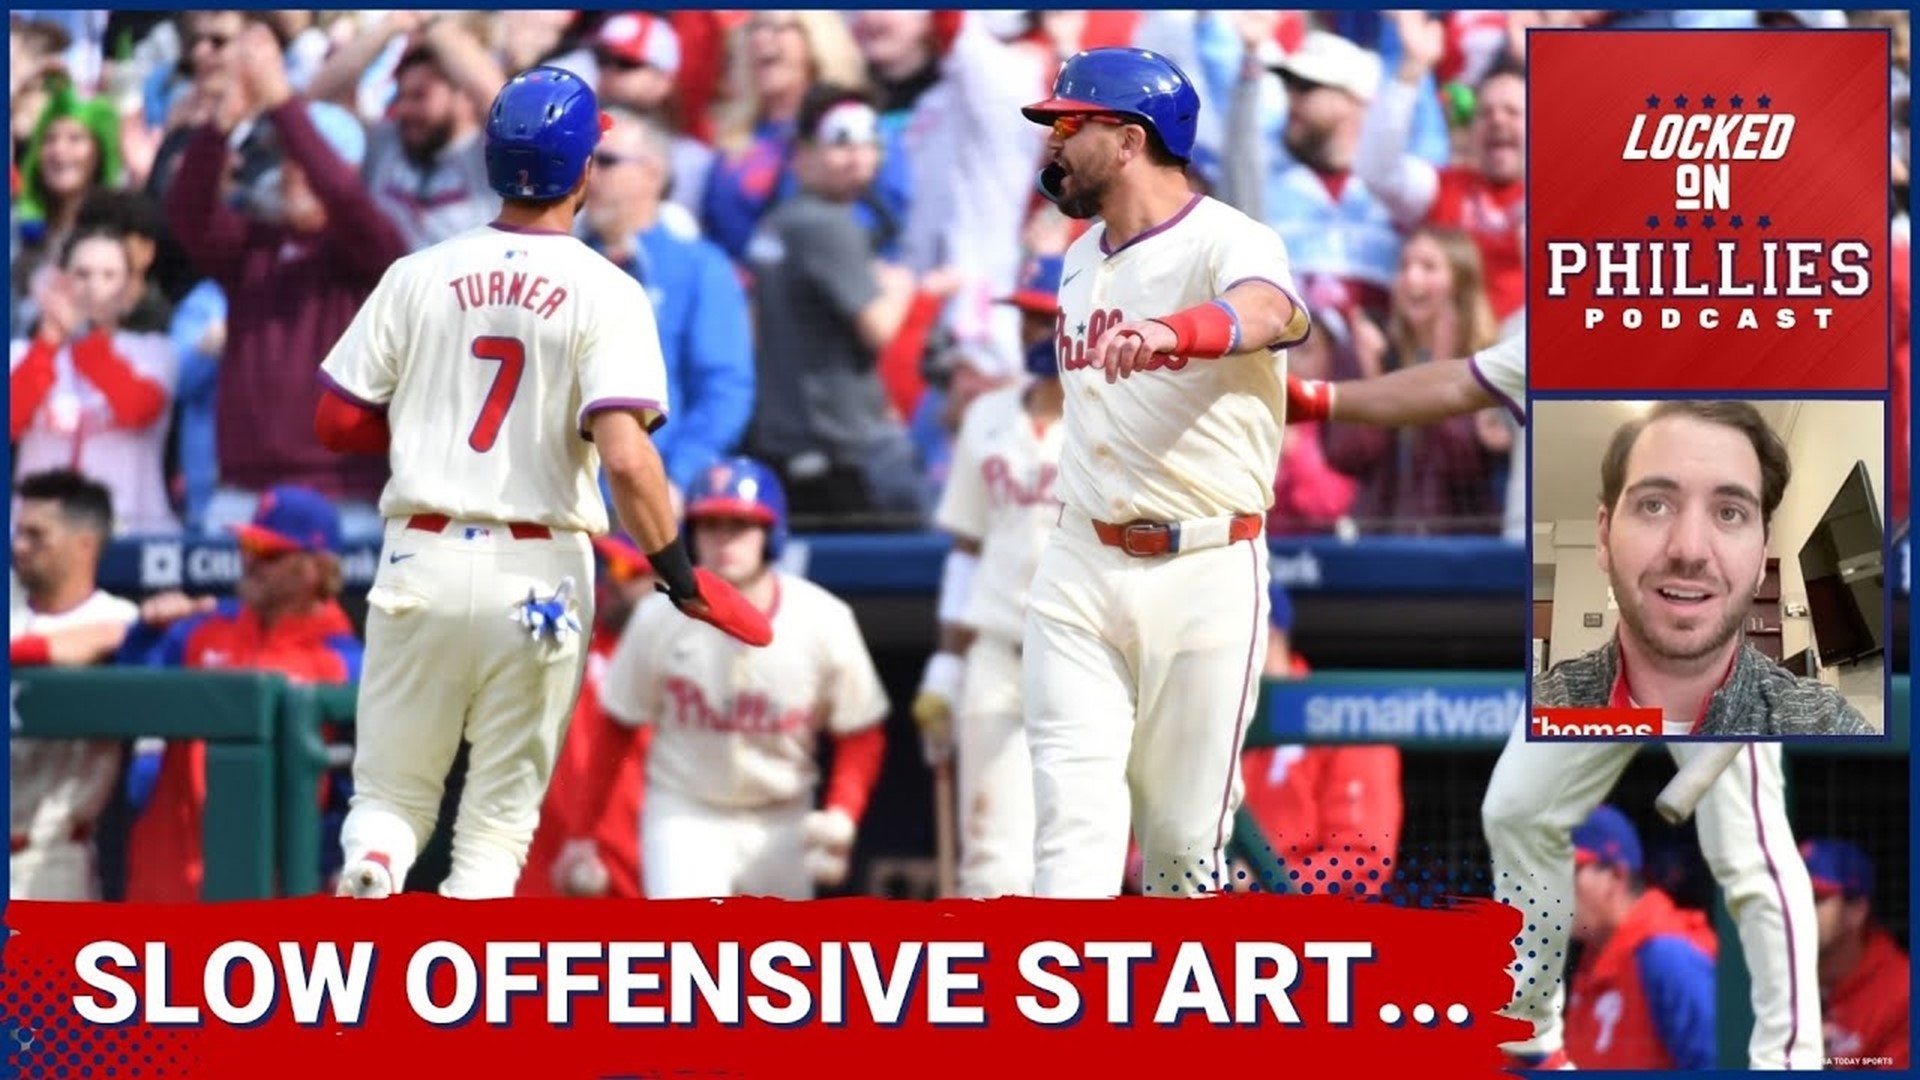 In today's episode, Connor discusses the Philadelphia Phillies' series with the Cincinnati Reds that begins tonight at Citizens Bank Park.